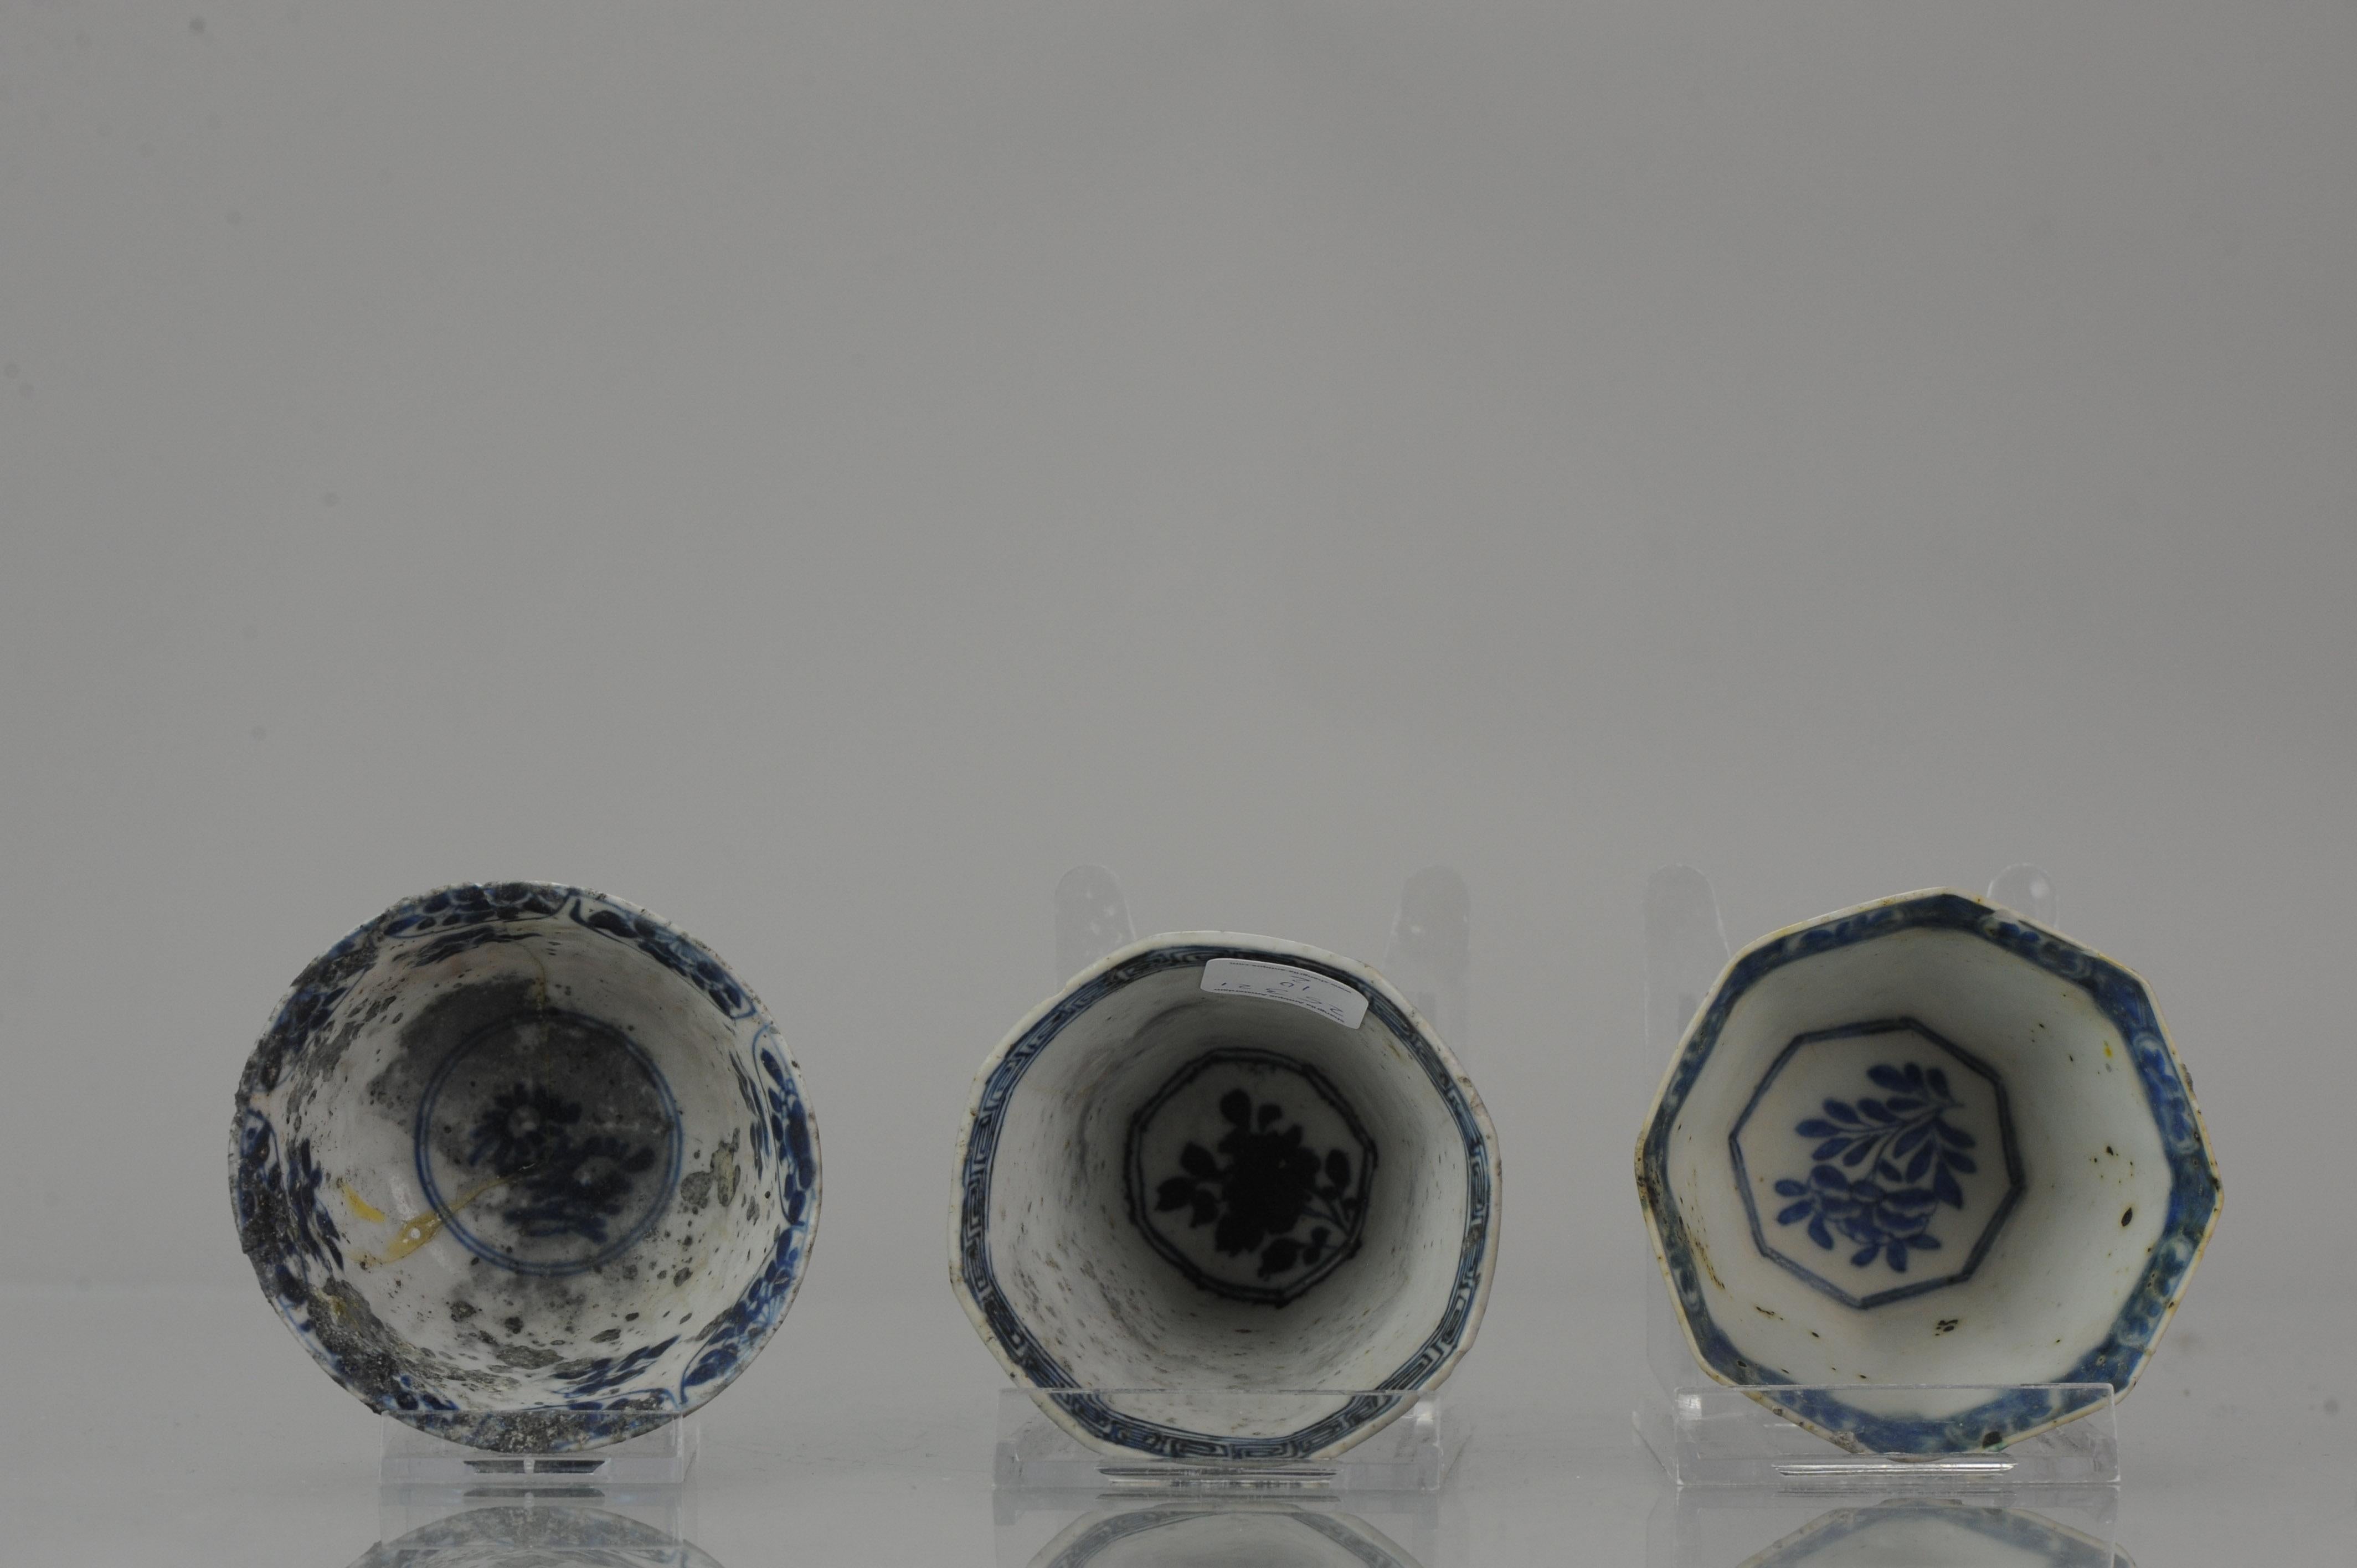 A very nicely made set of tea bowls China and Japan. Historically very interesting. It has burning damage. According to the history of the family who owned it was burned after the fires that occurred during the German bombardment of Rotterdam in